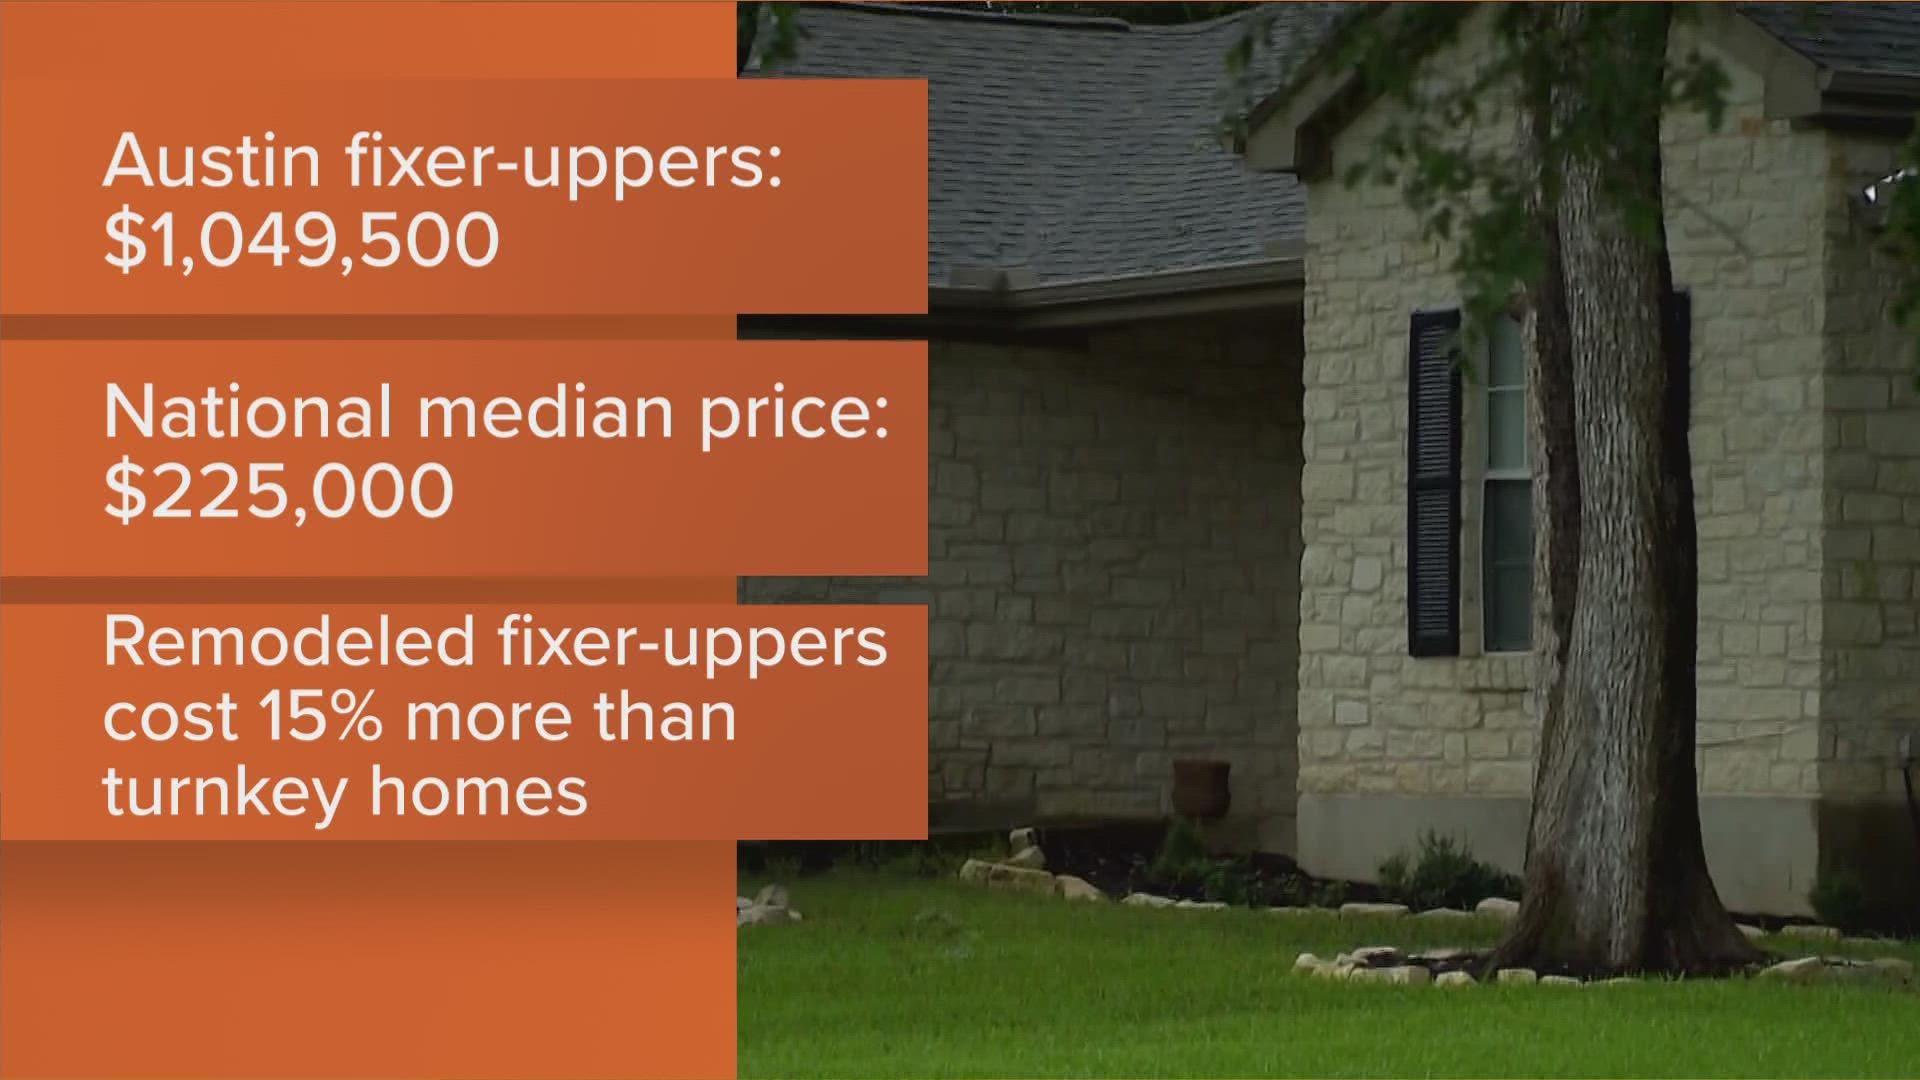 A new study says Austin has the second priciest "fixer-upper" homes in the country.